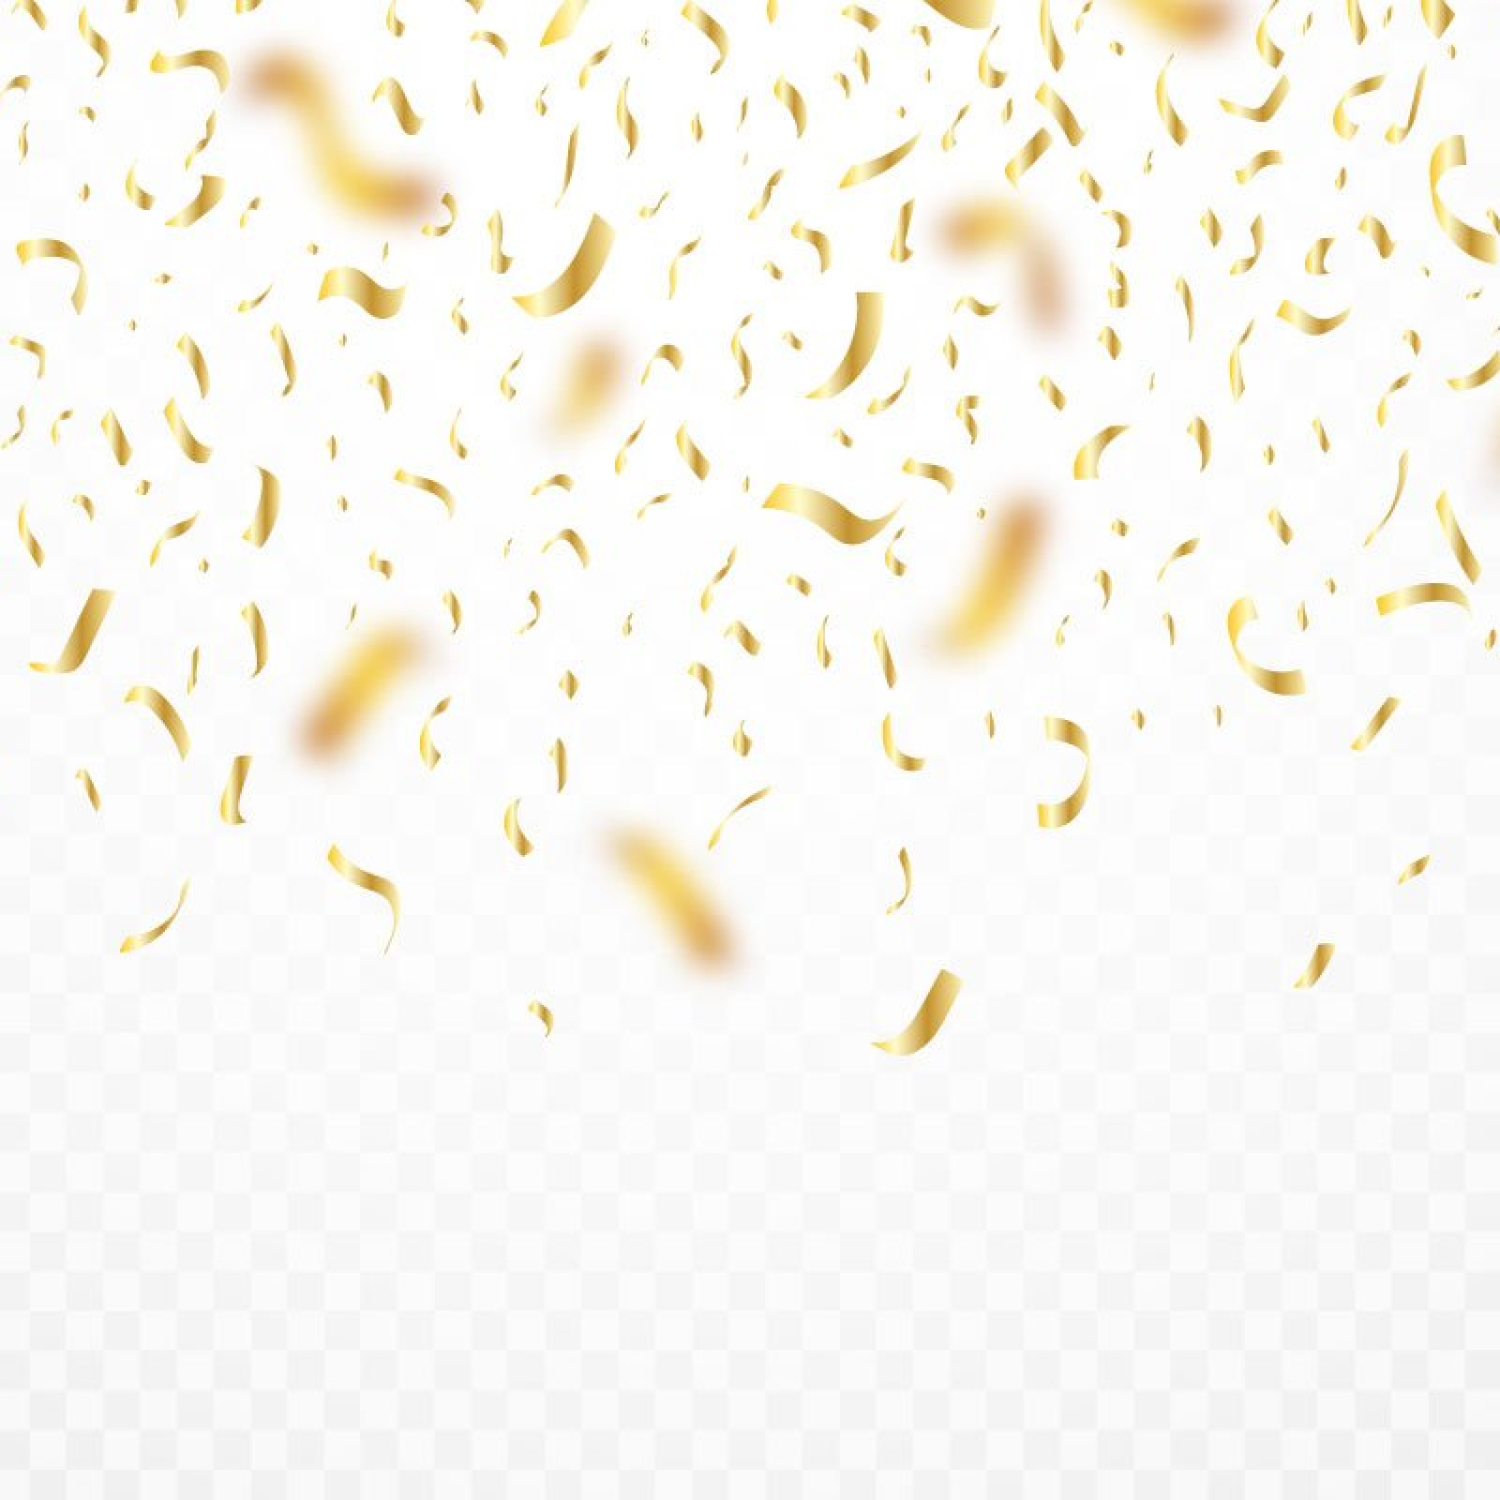 Confetti and Gold Foil Background cover.